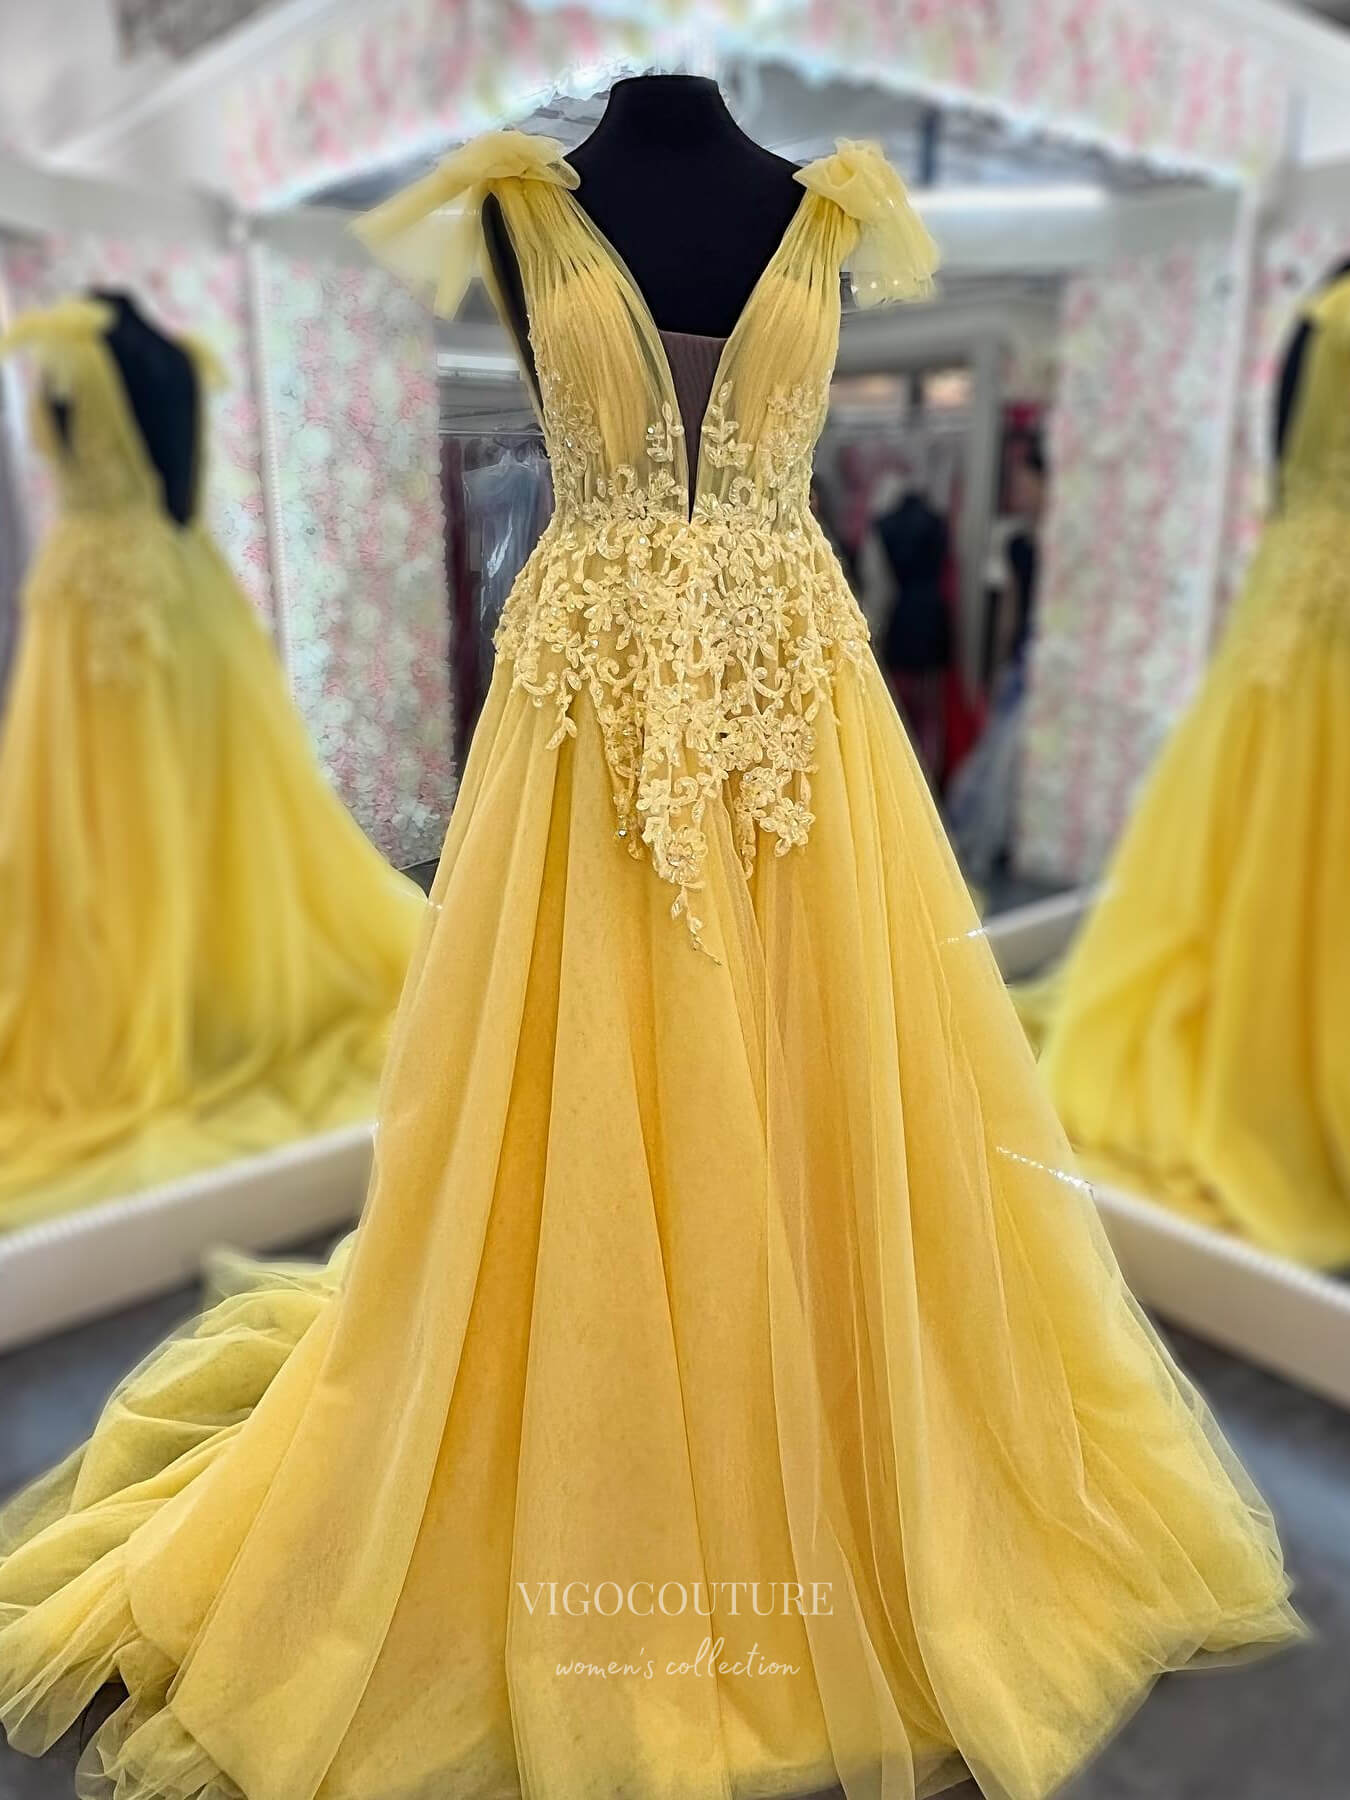 Yellow Pleated Tulle Plunging V-Neck Prom Dresses Lace Applique Bow-Tie Dress 24160-Prom Dresses-vigocouture-Yellow-Custom Size-vigocouture